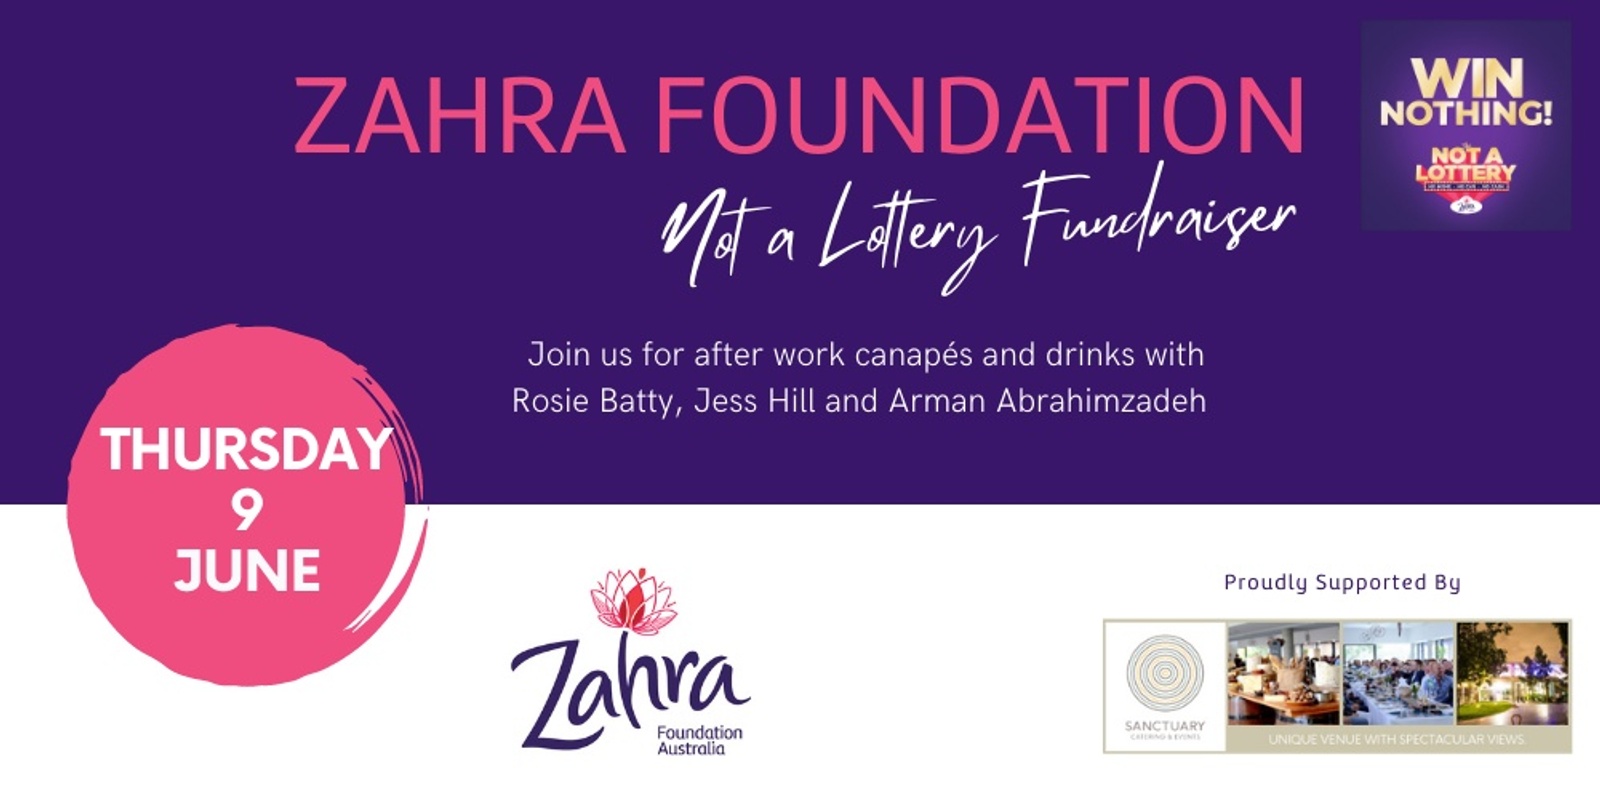 Banner image for Zahra Foundation Not A Lottery Fundraiser with Rosie Batty, Jess Hill, & Arman Abrahimzadeh 